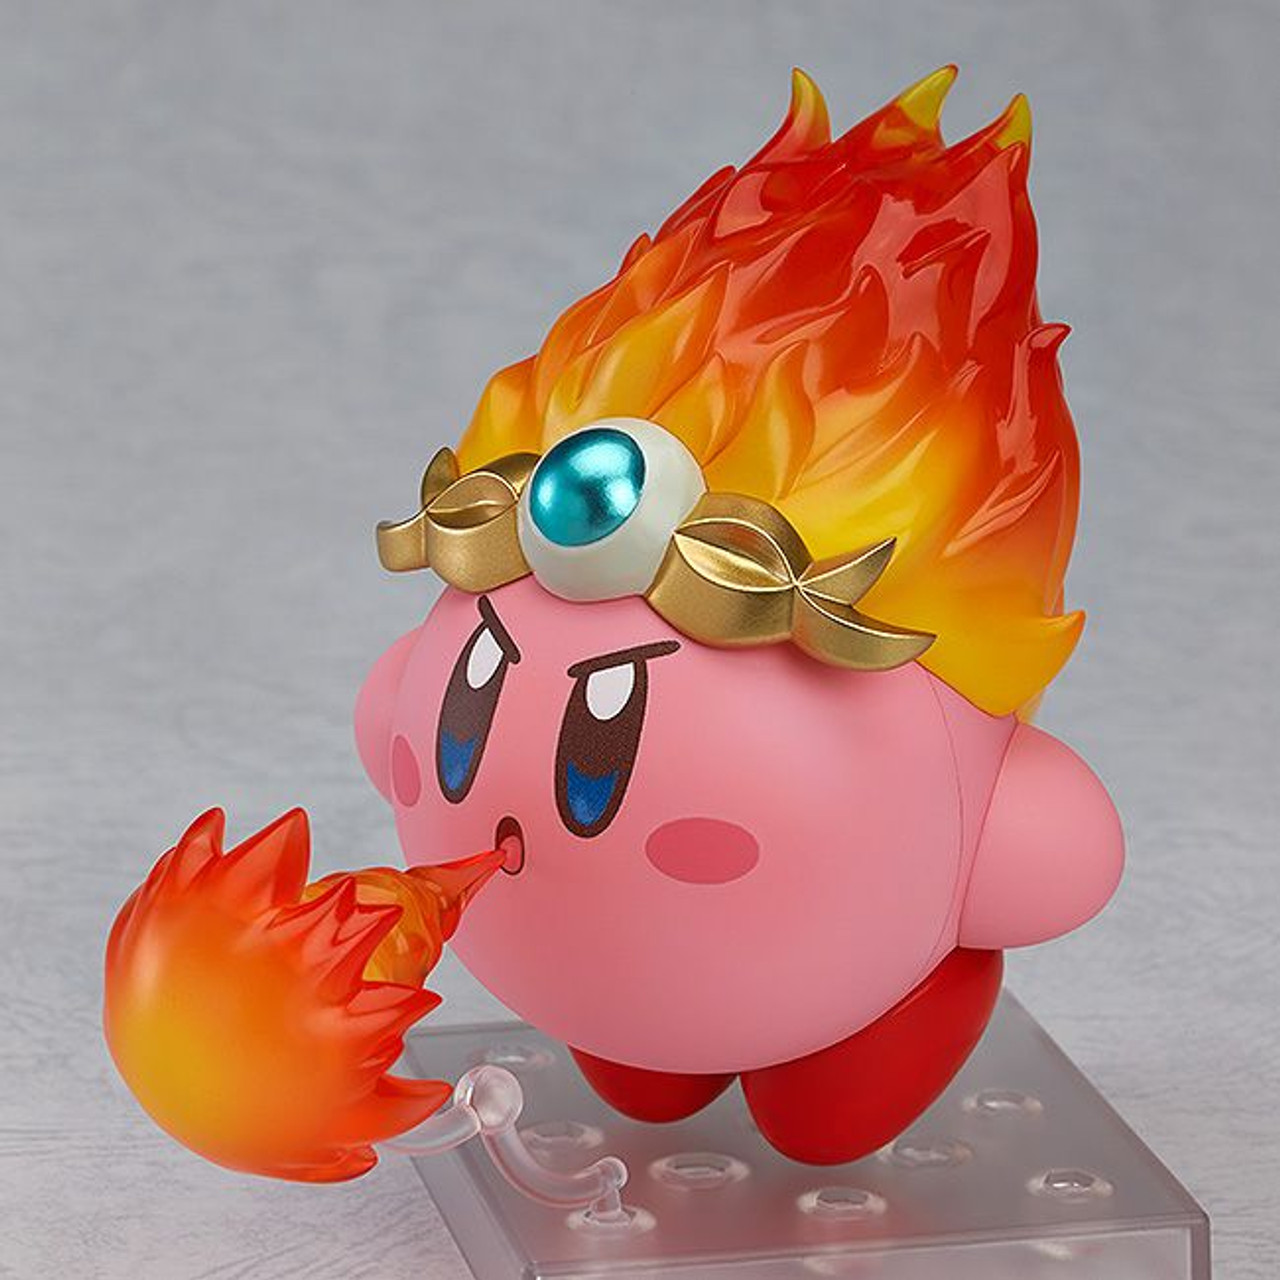 Nendoroid Kirby: 30th Anniversary Edition (Second Preorder  Period),Figures,Nendoroid,Nendoroid Figures,Kirby